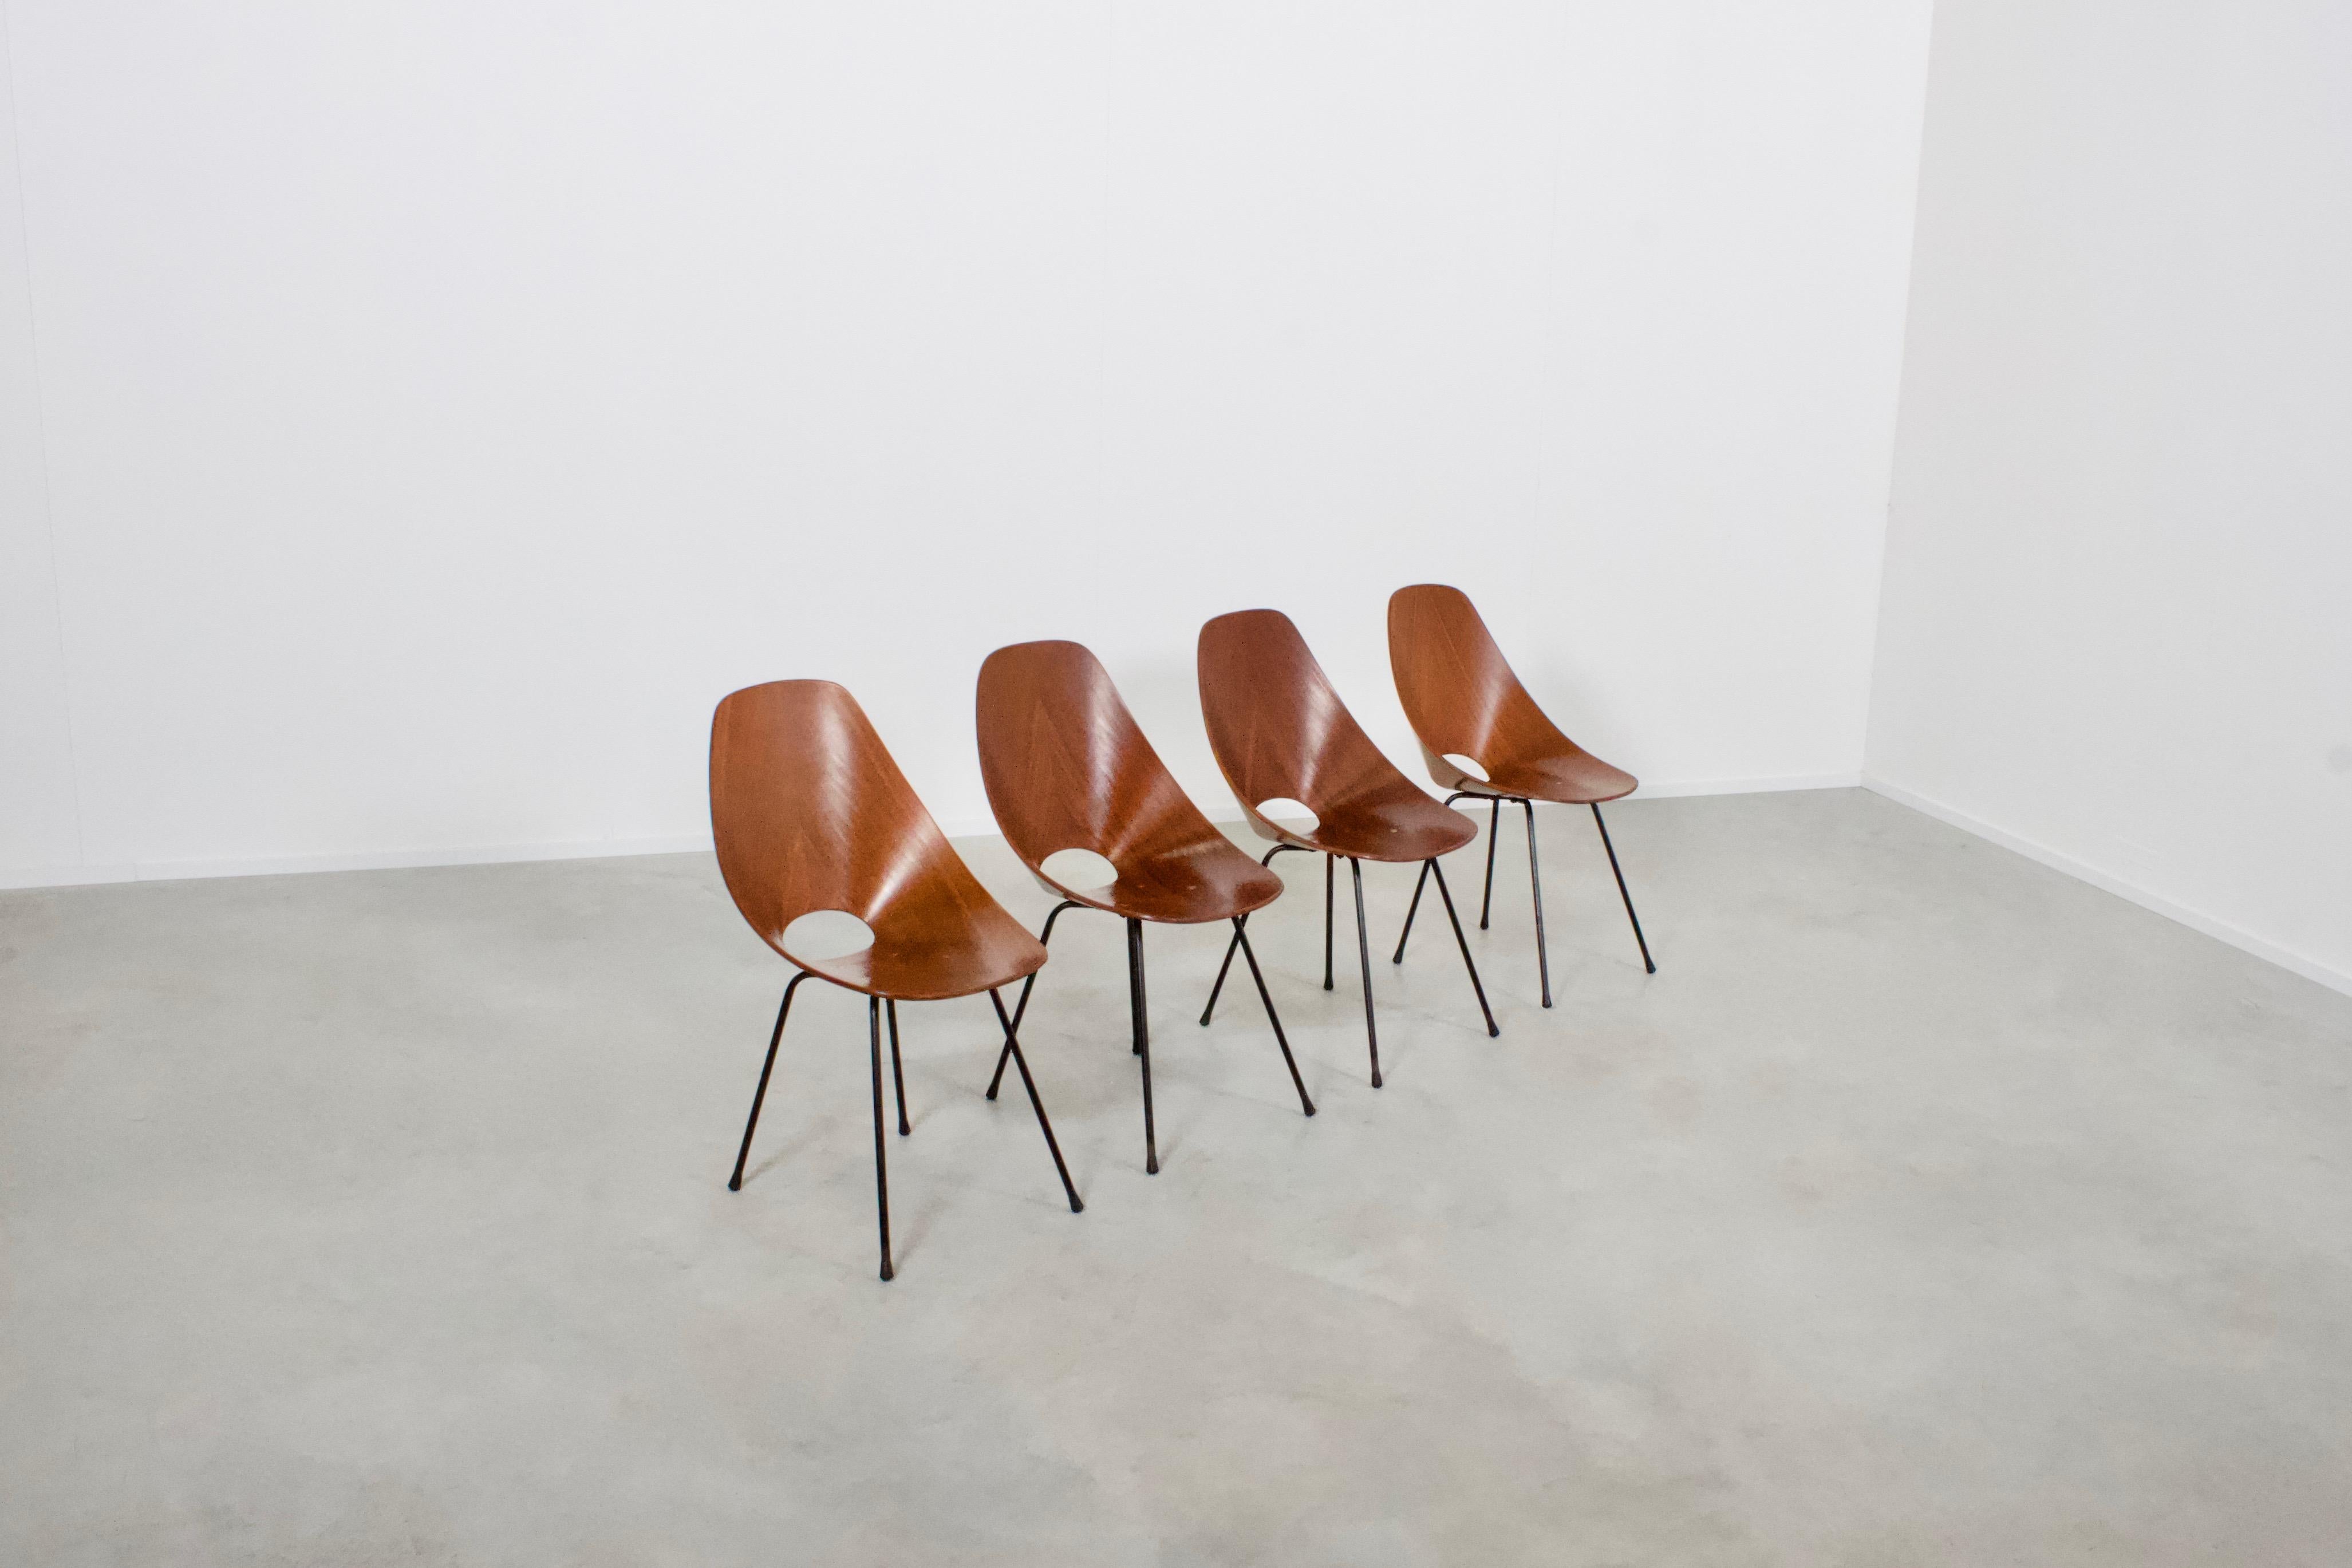 Set of four original ‘Medea’ chairs in very good condition.

Designed by Vittorio Nobili, Italy 1955

Produced by Tagliabue 

The plywood shells are veneered in mahogany with a beautiful grain, they are formed out of a single piece of thermo-formed